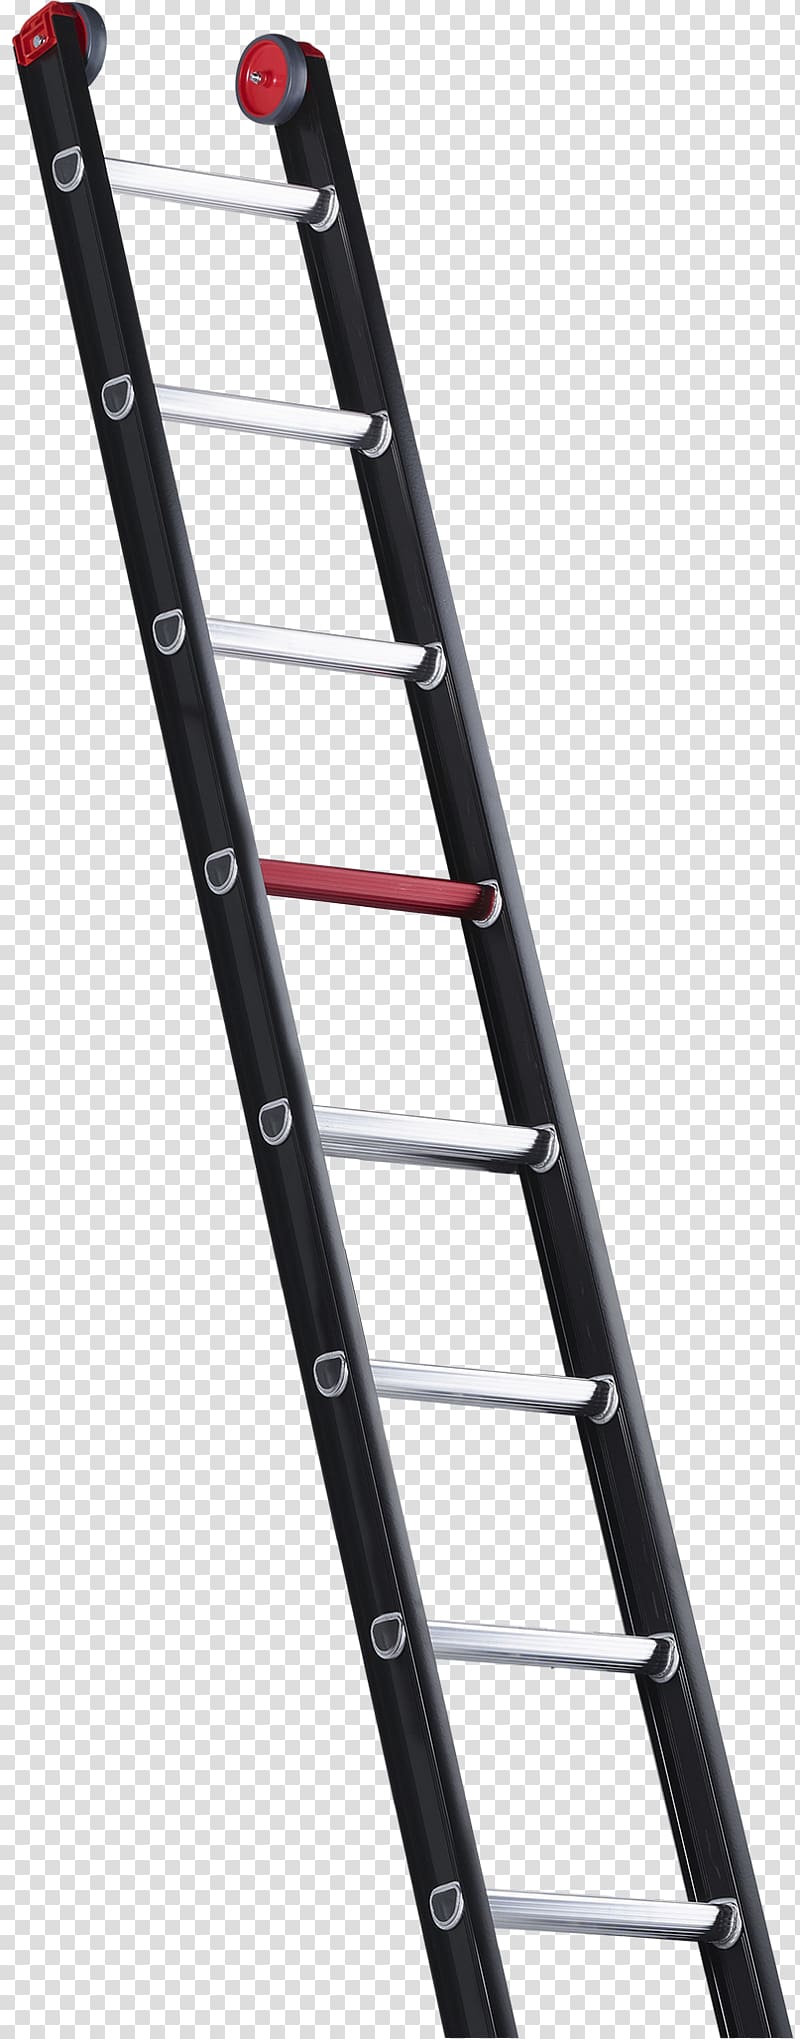 Ladder Altrex Innovation Quality, ladders transparent background PNG clipart